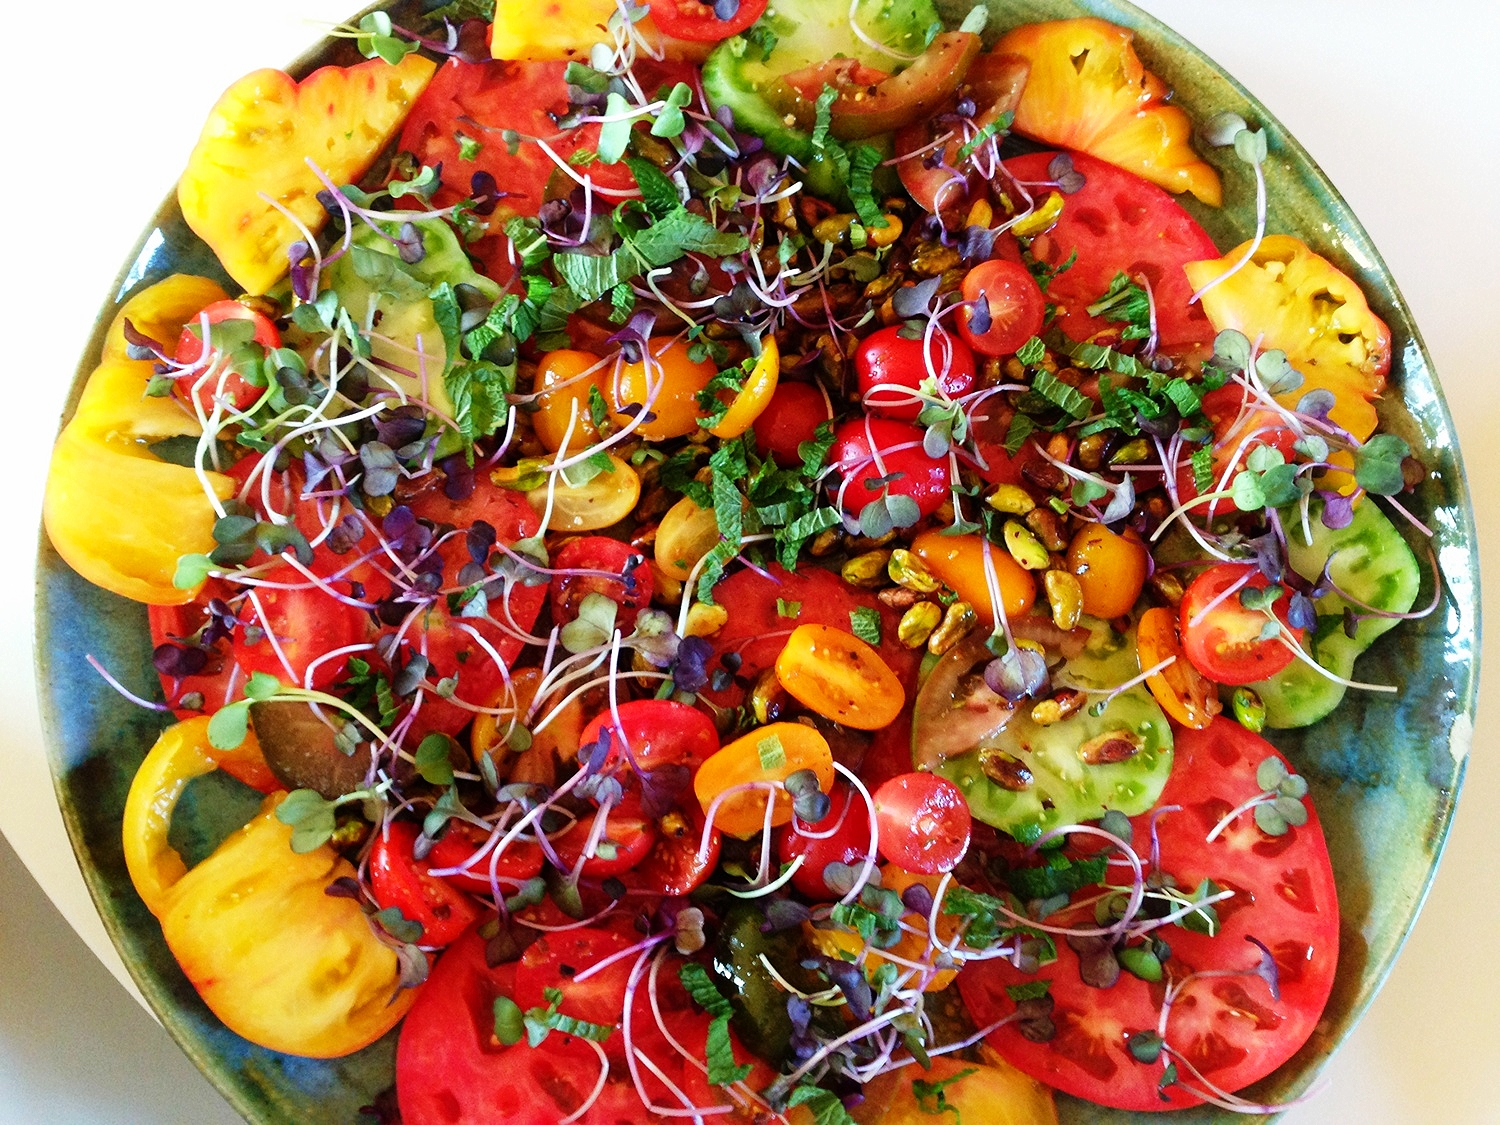 Heirloom tomato salad, broccoli sprouts, pistachios, and garden herbs